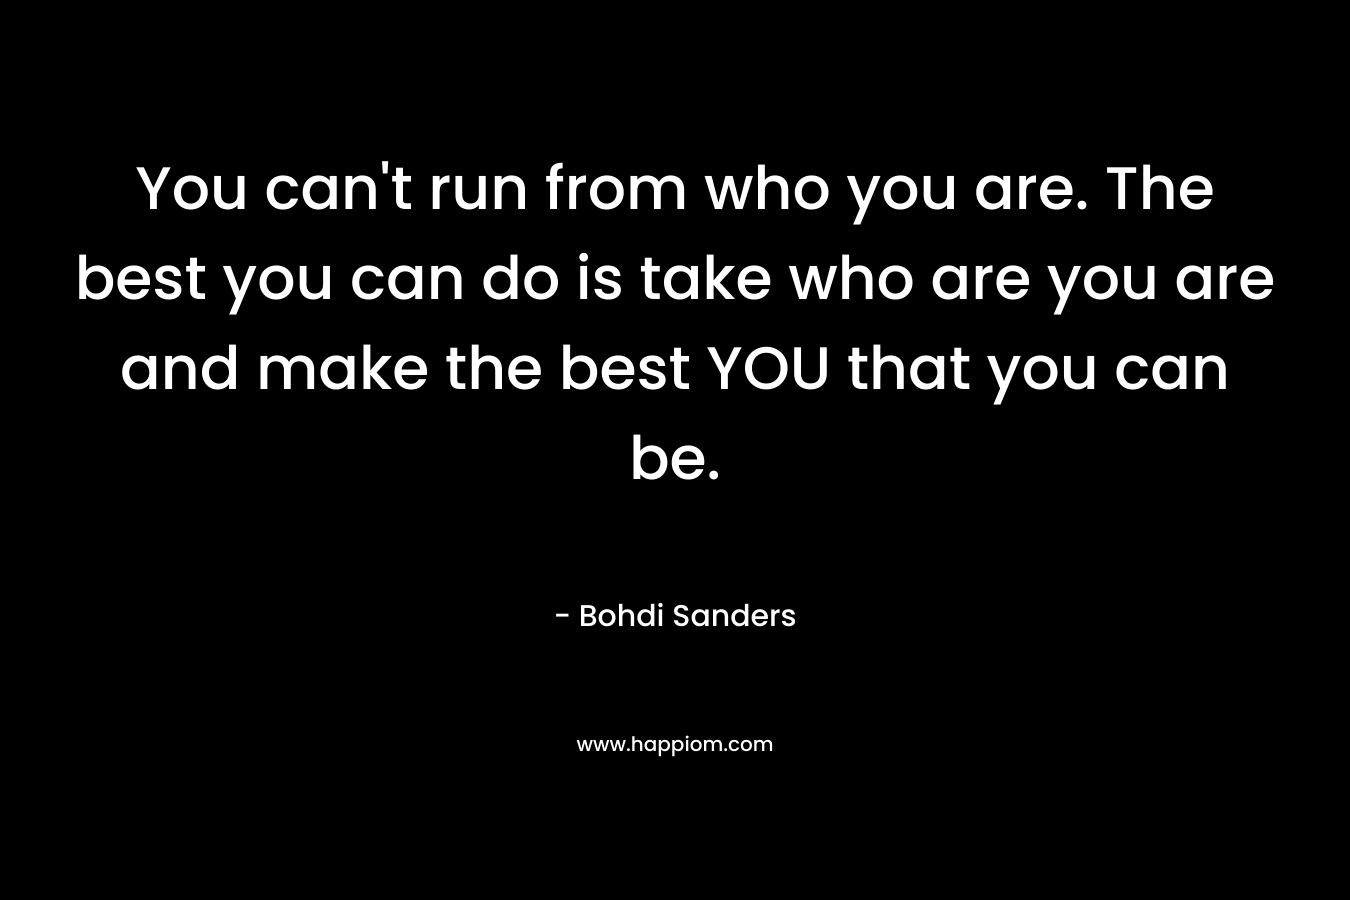 You can't run from who you are. The best you can do is take who are you are and make the best YOU that you can be.